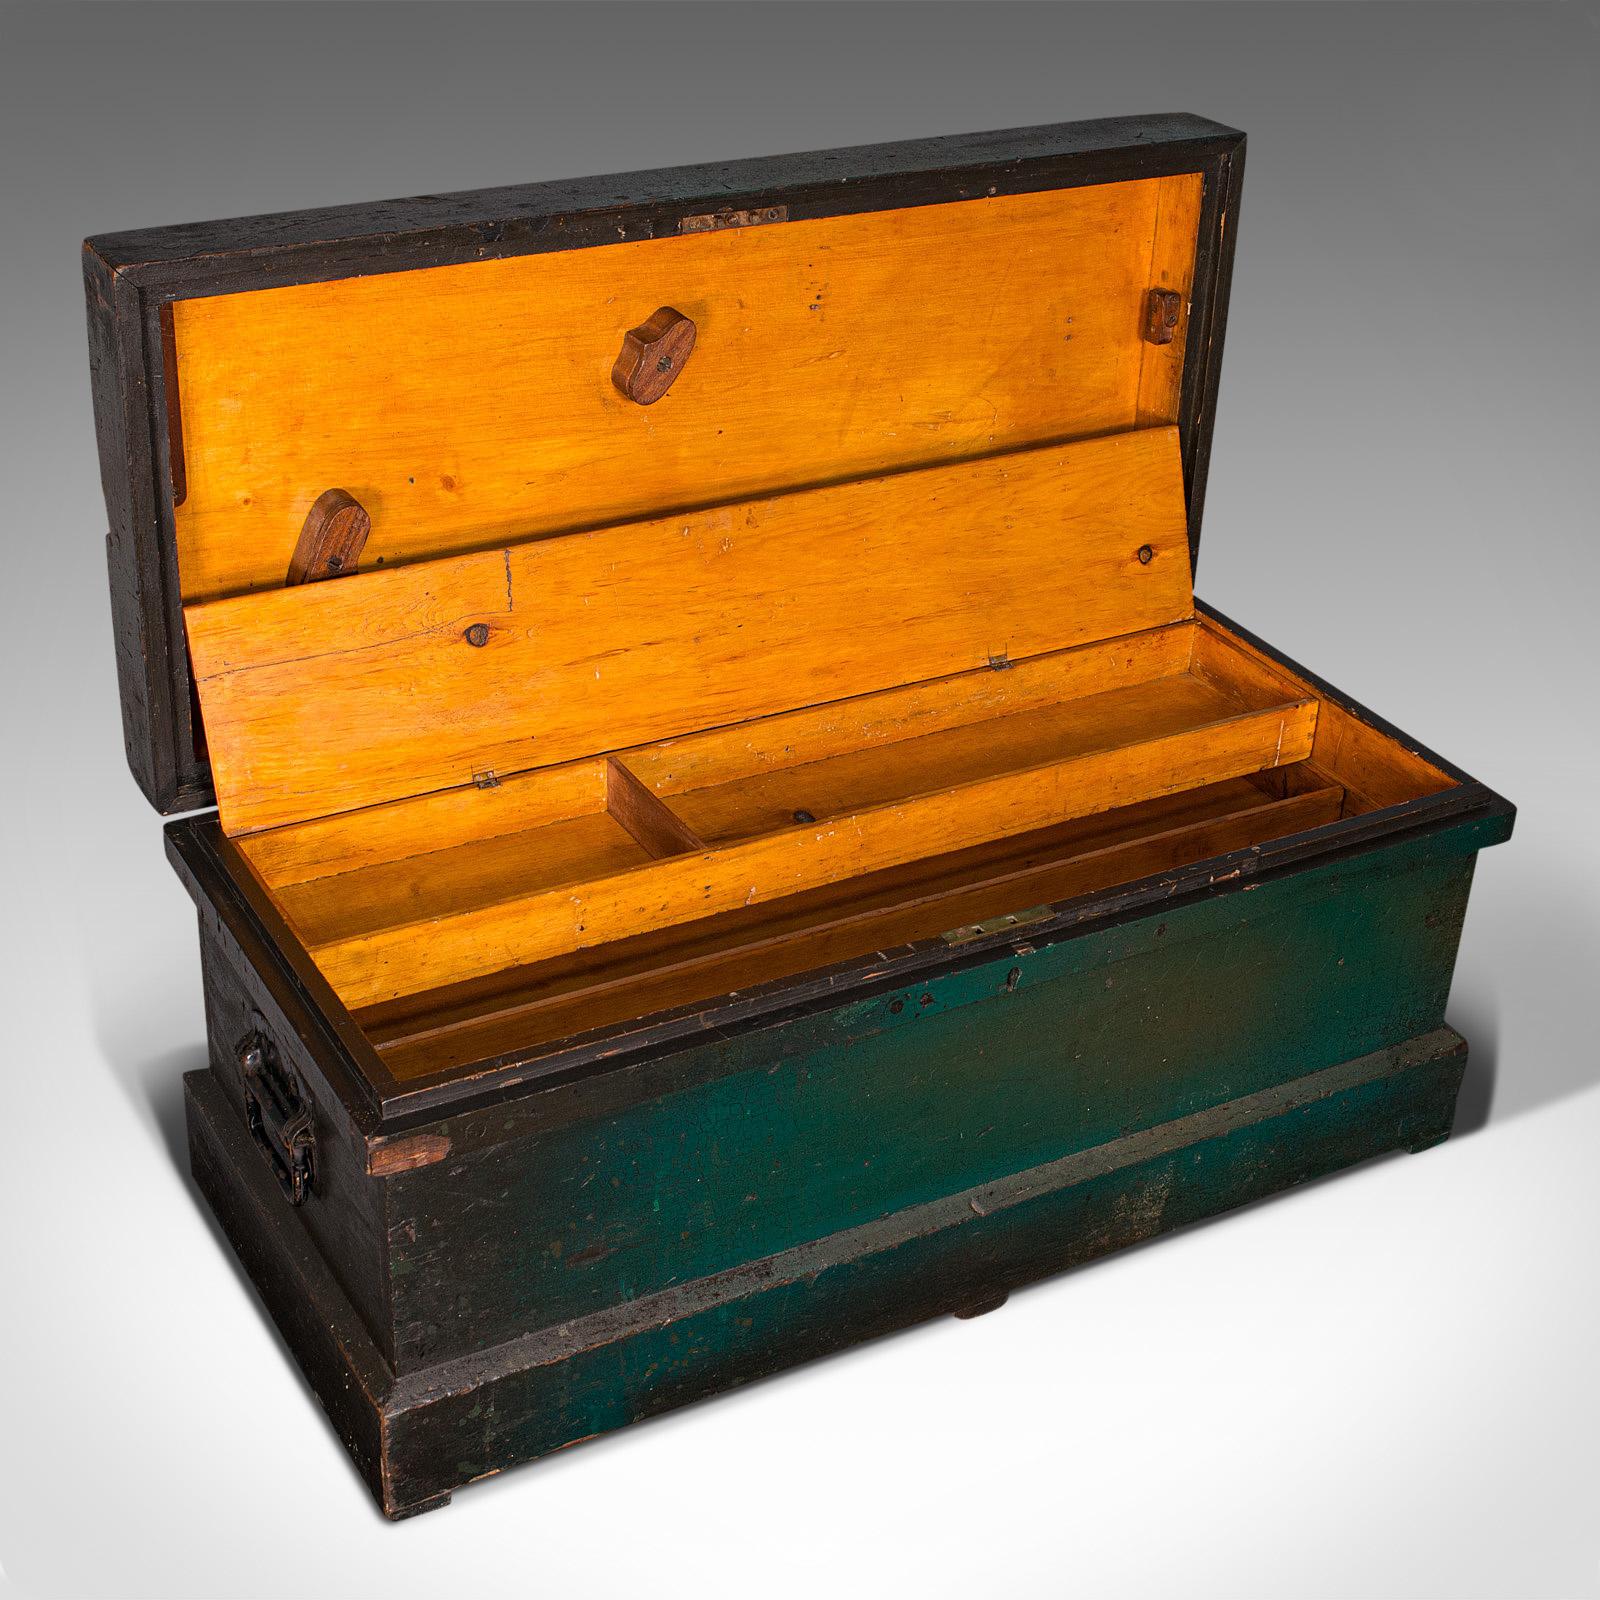 Pine Antique Shipwright's Chest, English, Craftsman's Tool Trunk, Victorian, C.1900